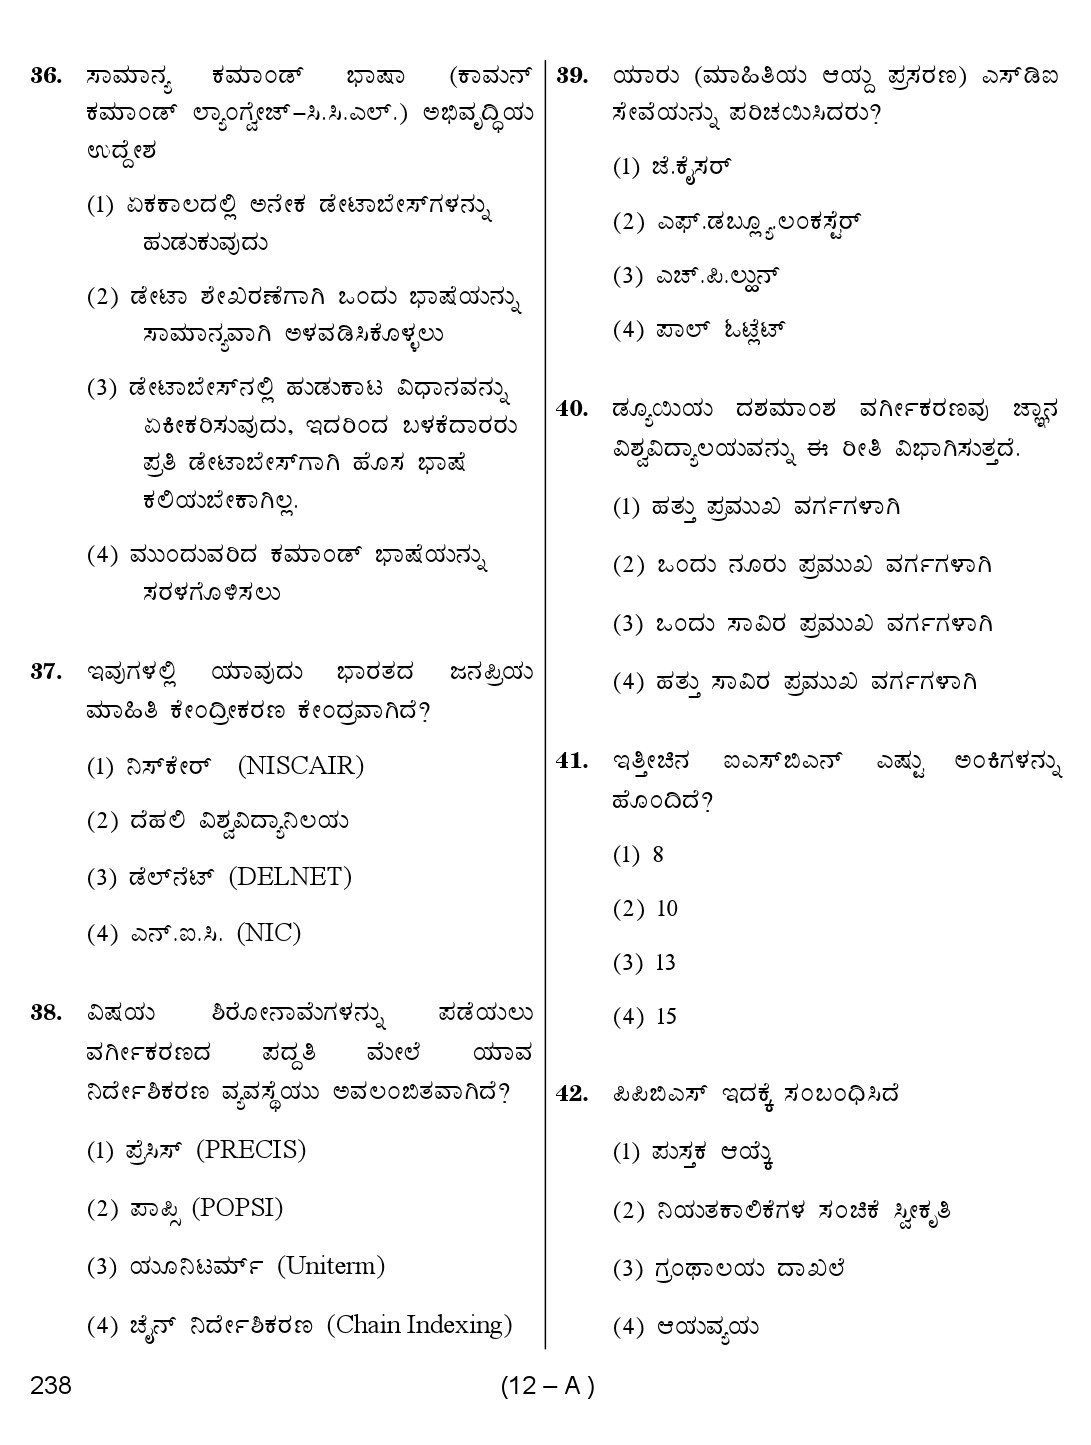 Karnataka PSC 238 Specific Paper II Librarian Exam Sample Question Paper 12